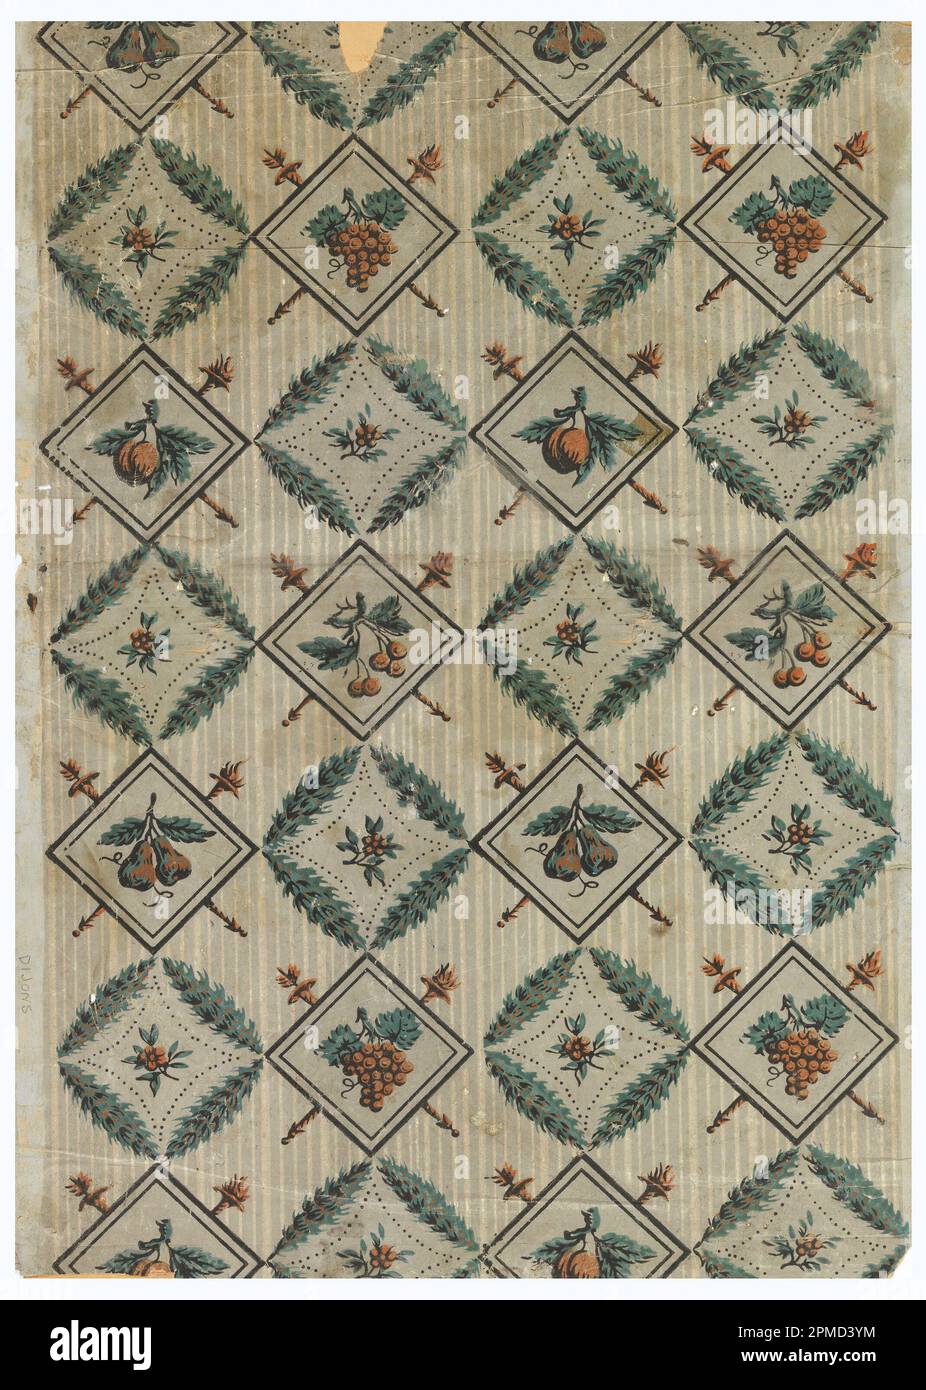 Sidewall (France); block-printed on handmade paper; a) Overall: 61.5 x 52.5 cm (24 3/16 x 20 11/16 in.) b) 15 x 52.5 cm Stock Photo